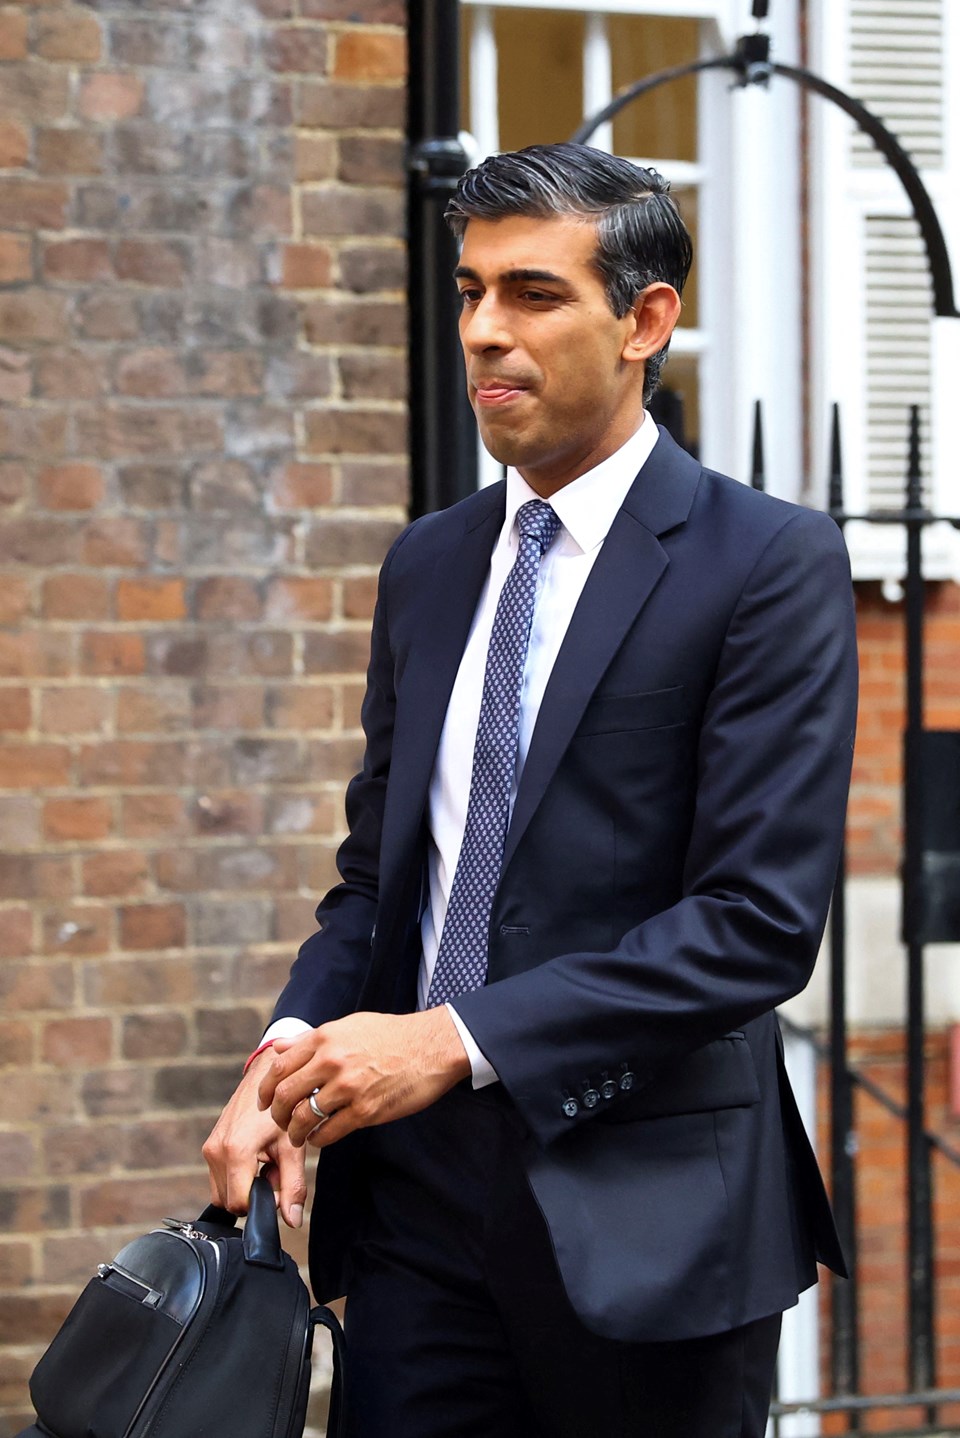 Britain's new prime minister has been announced (Who is Rishi Sunak?) - 1